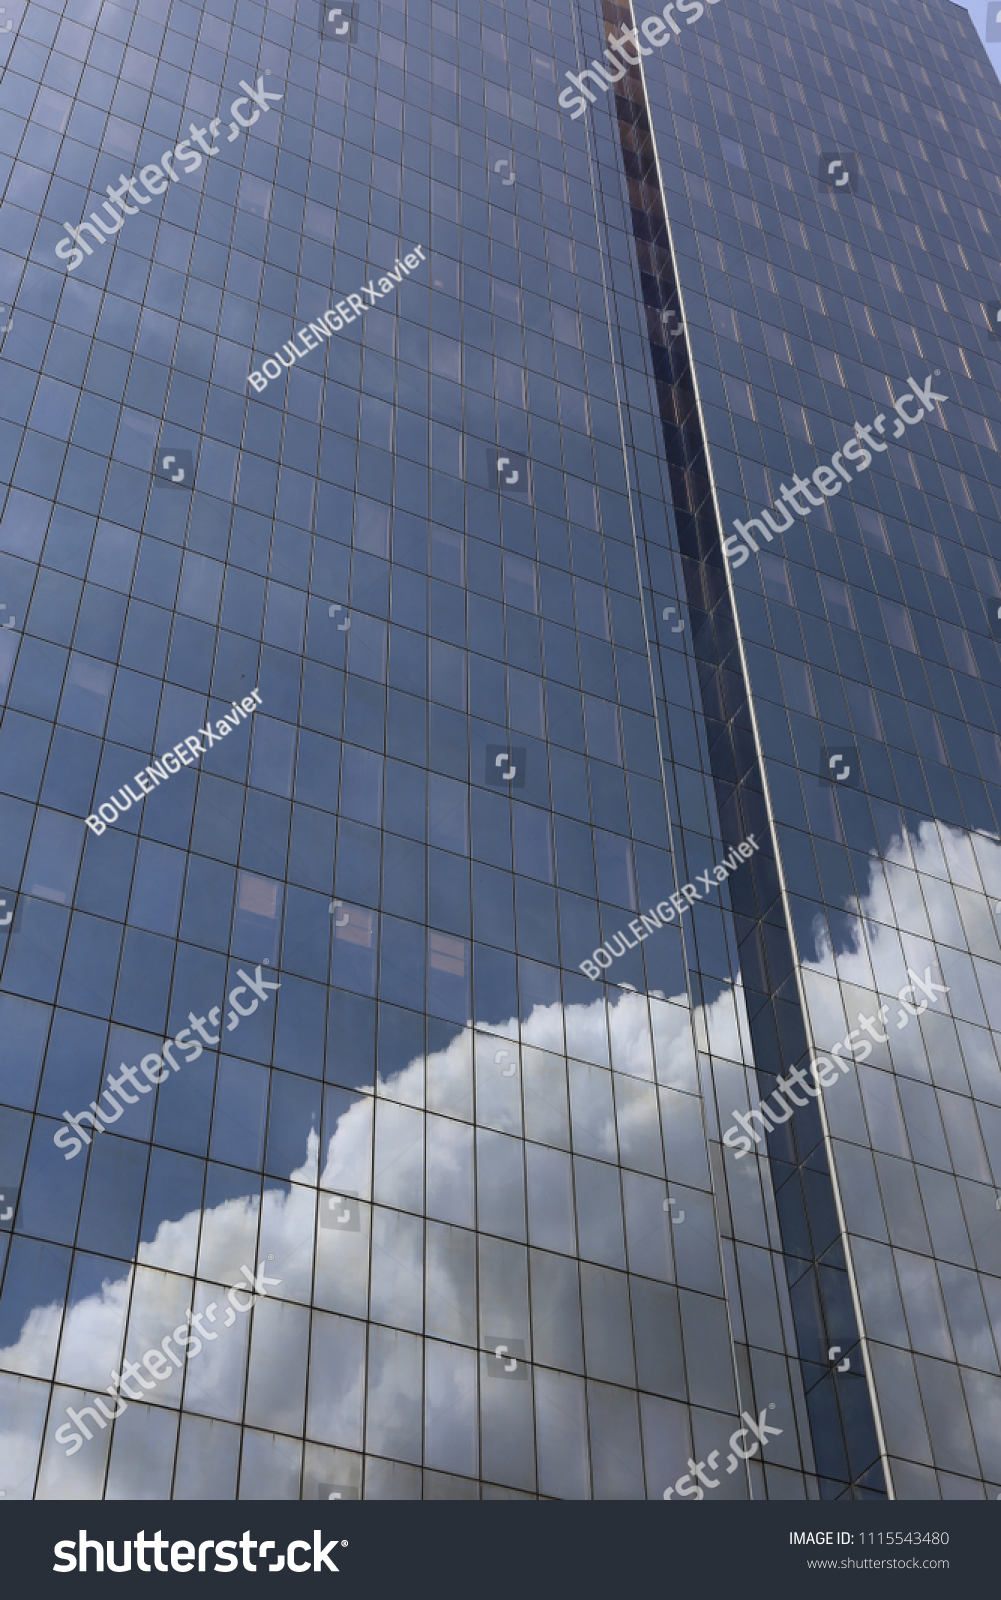 Close up outdoor view of part of a skyscraper with pattern of reflective glass windows. Blue cloudy sky reflected on the bright surface. Modern architecture with a big white cloud on the facade.  #1115543480